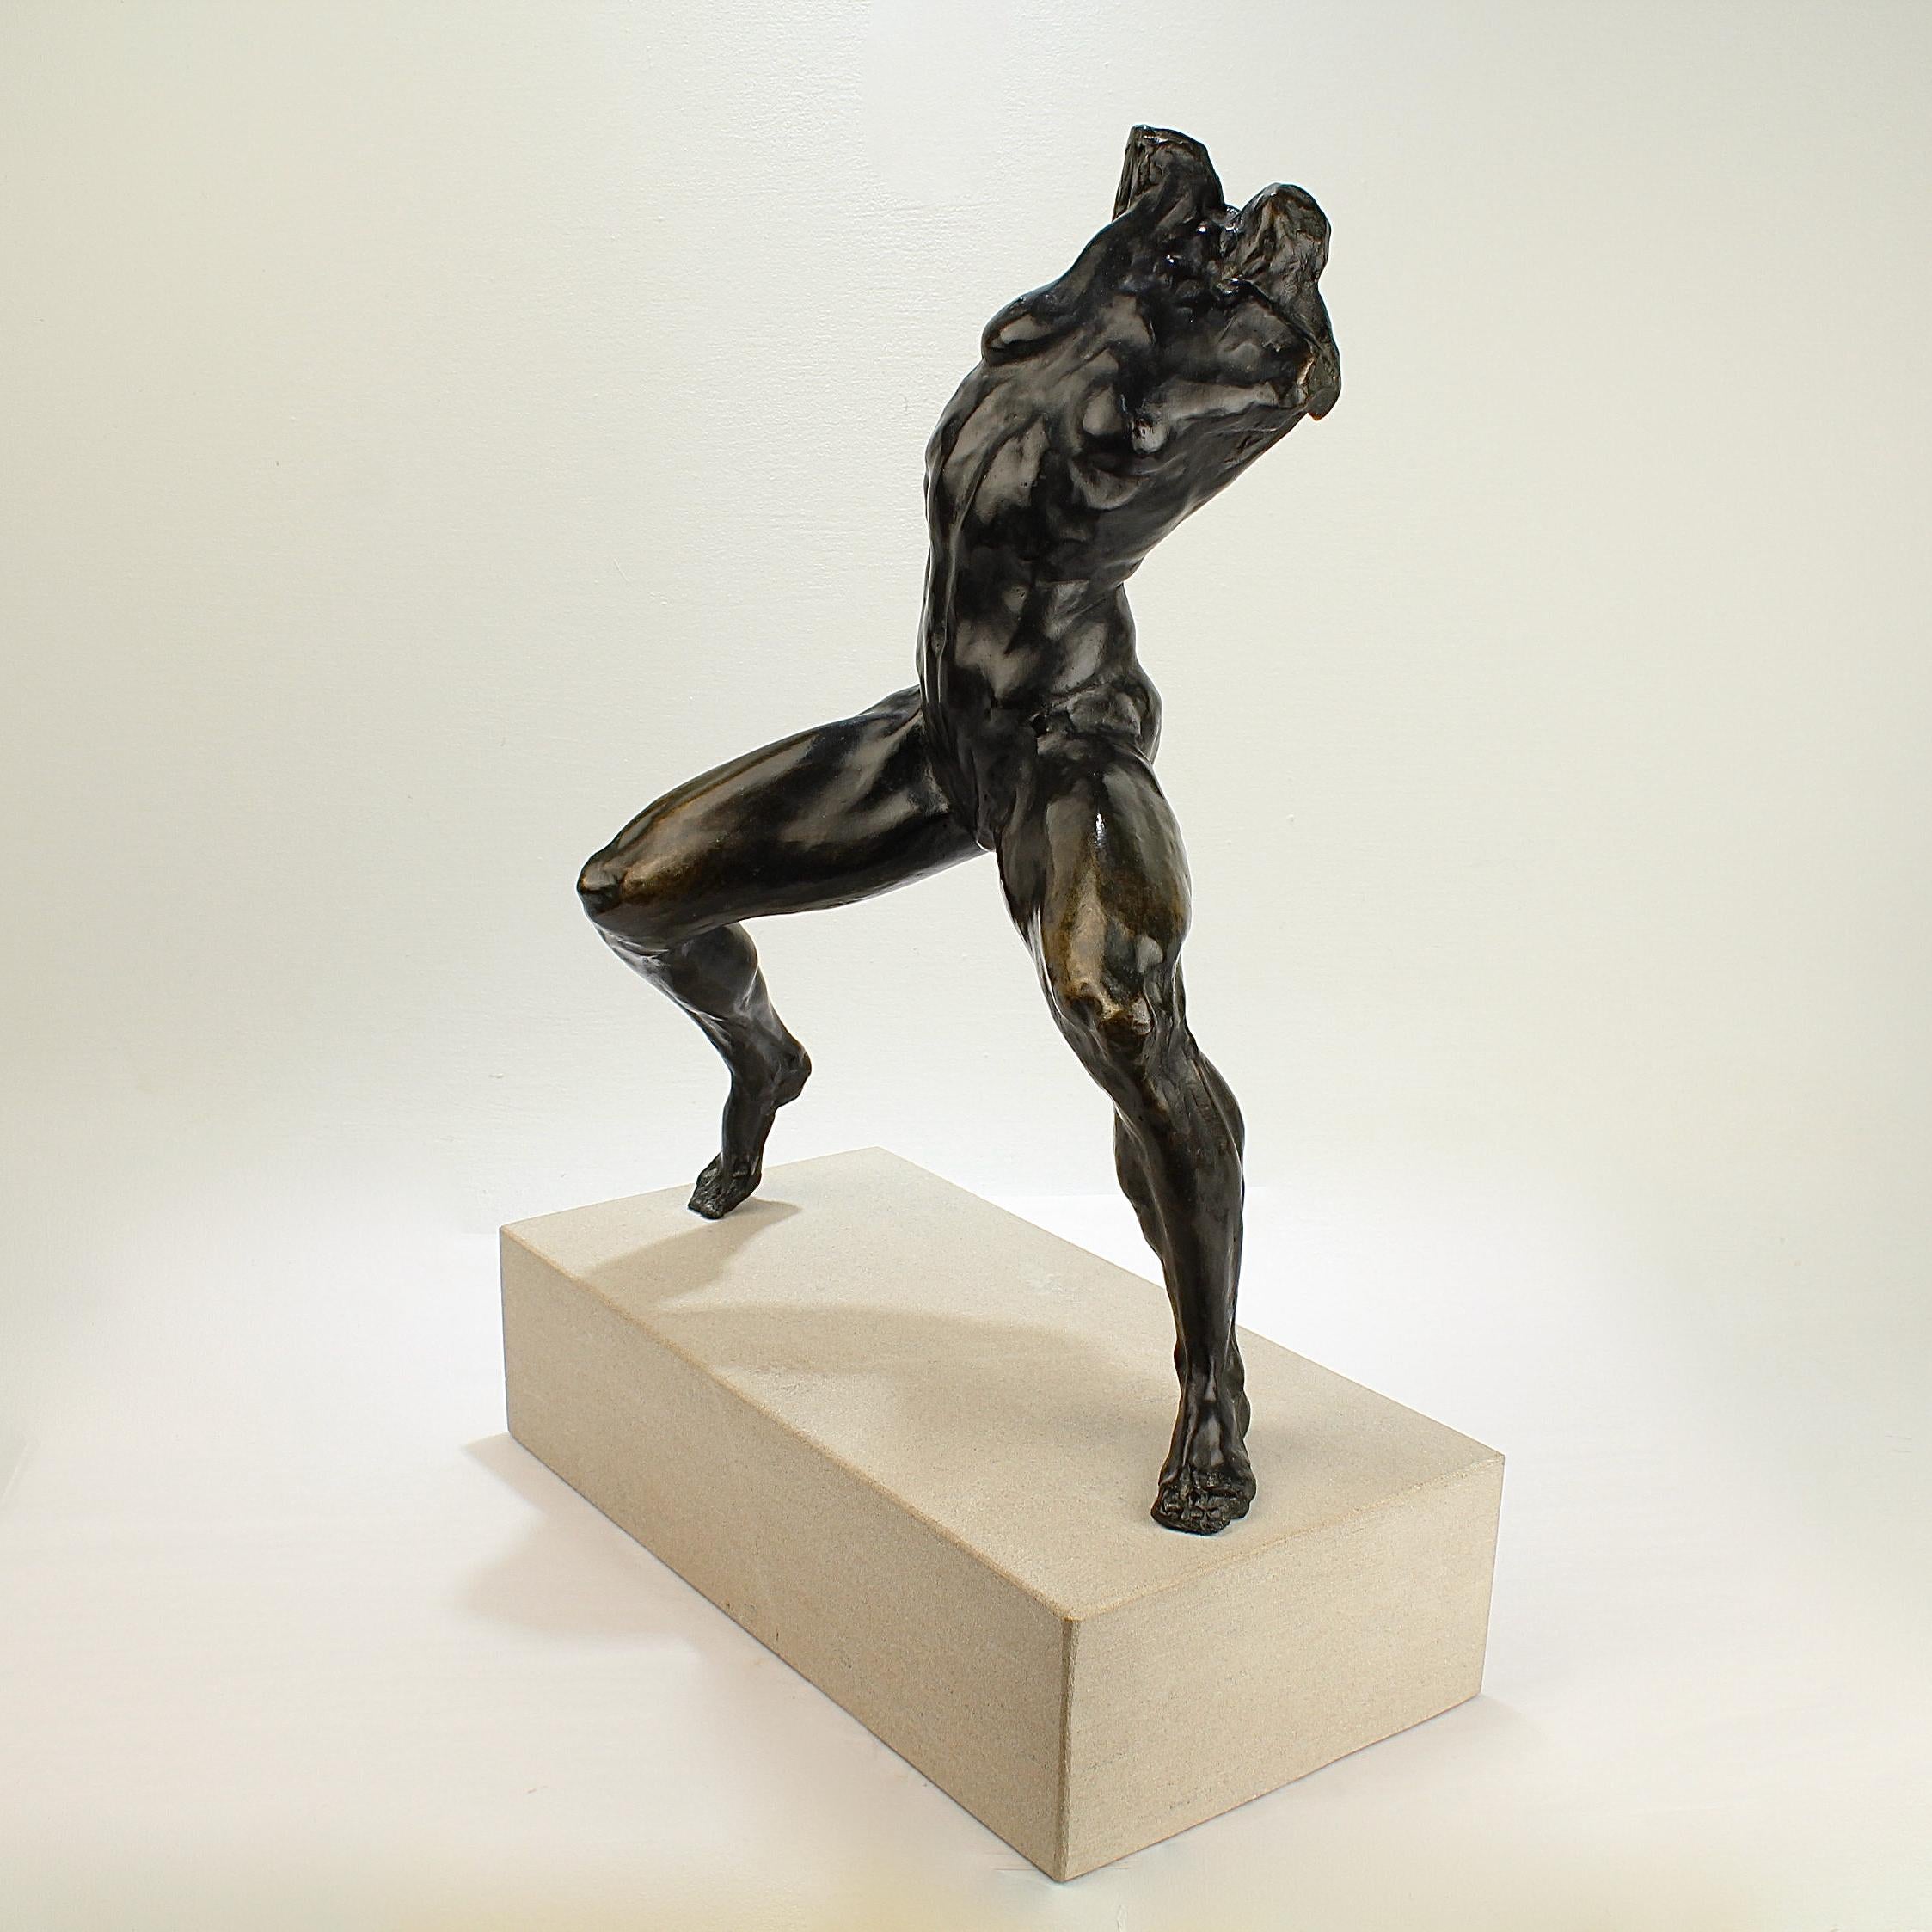 A fine bronze sculpture by Gary Weisman of a female nude.

Gary Weisman is an important living American sculptor active in Philadelphia, PA. His works are held in important public and private collections worldwide. 

Signed to the reverse of the